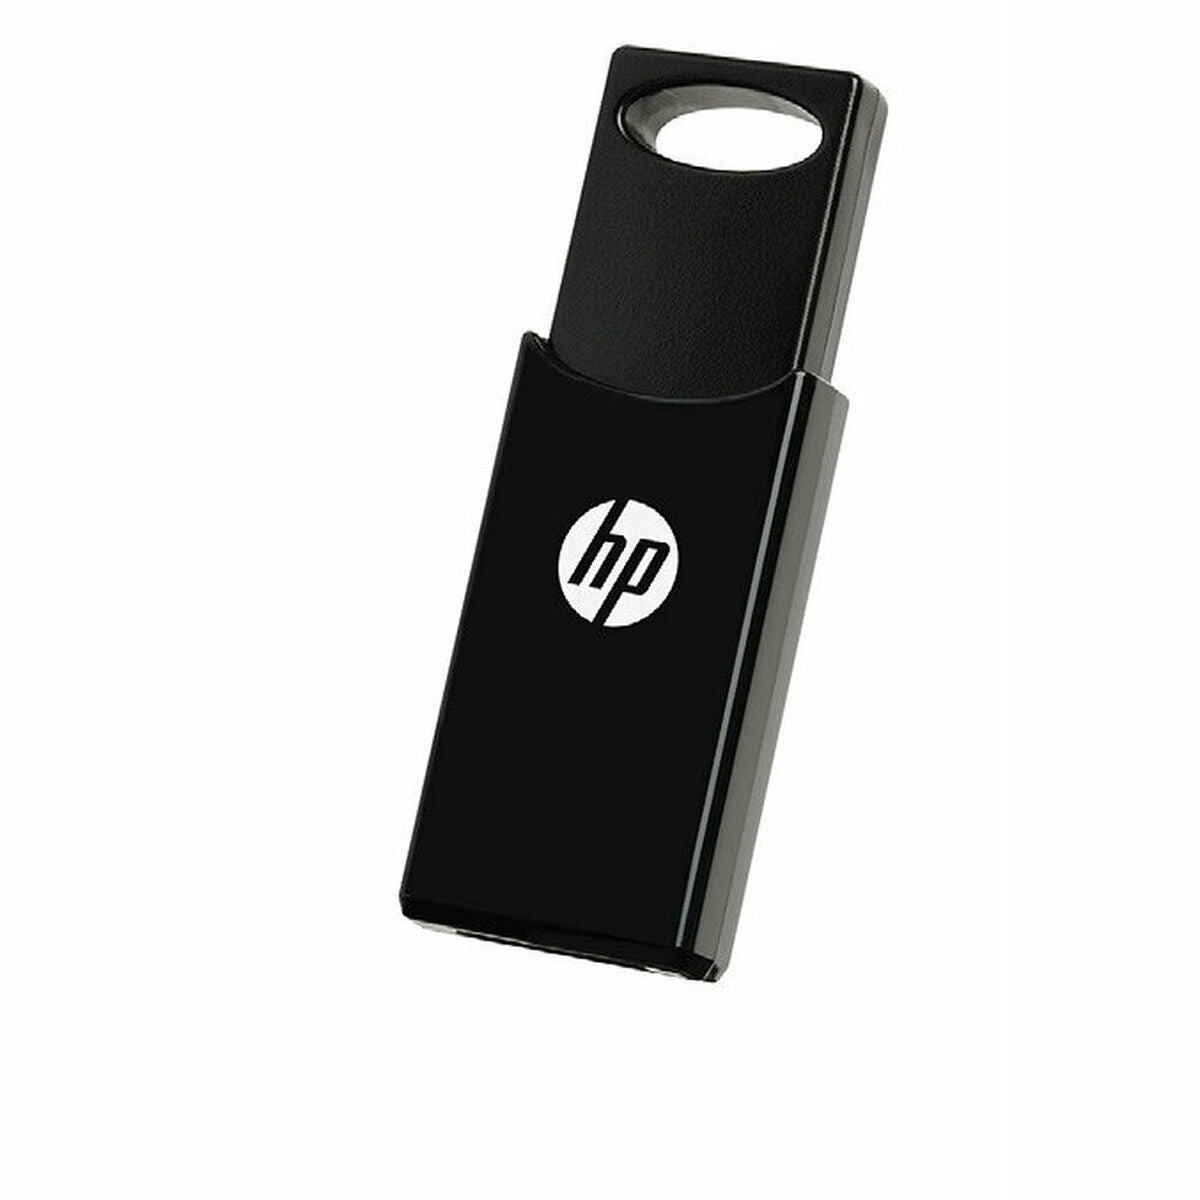 USB stick HP V212W 128GB, HP, Computing, Data storage, usb-stick-hp-v212w-128gb, Brand_HP, category-reference-2609, category-reference-2803, category-reference-2817, category-reference-t-19685, category-reference-t-19909, category-reference-t-21355, computers / components, Condition_NEW, Price_20 - 50, Teleworking, RiotNook